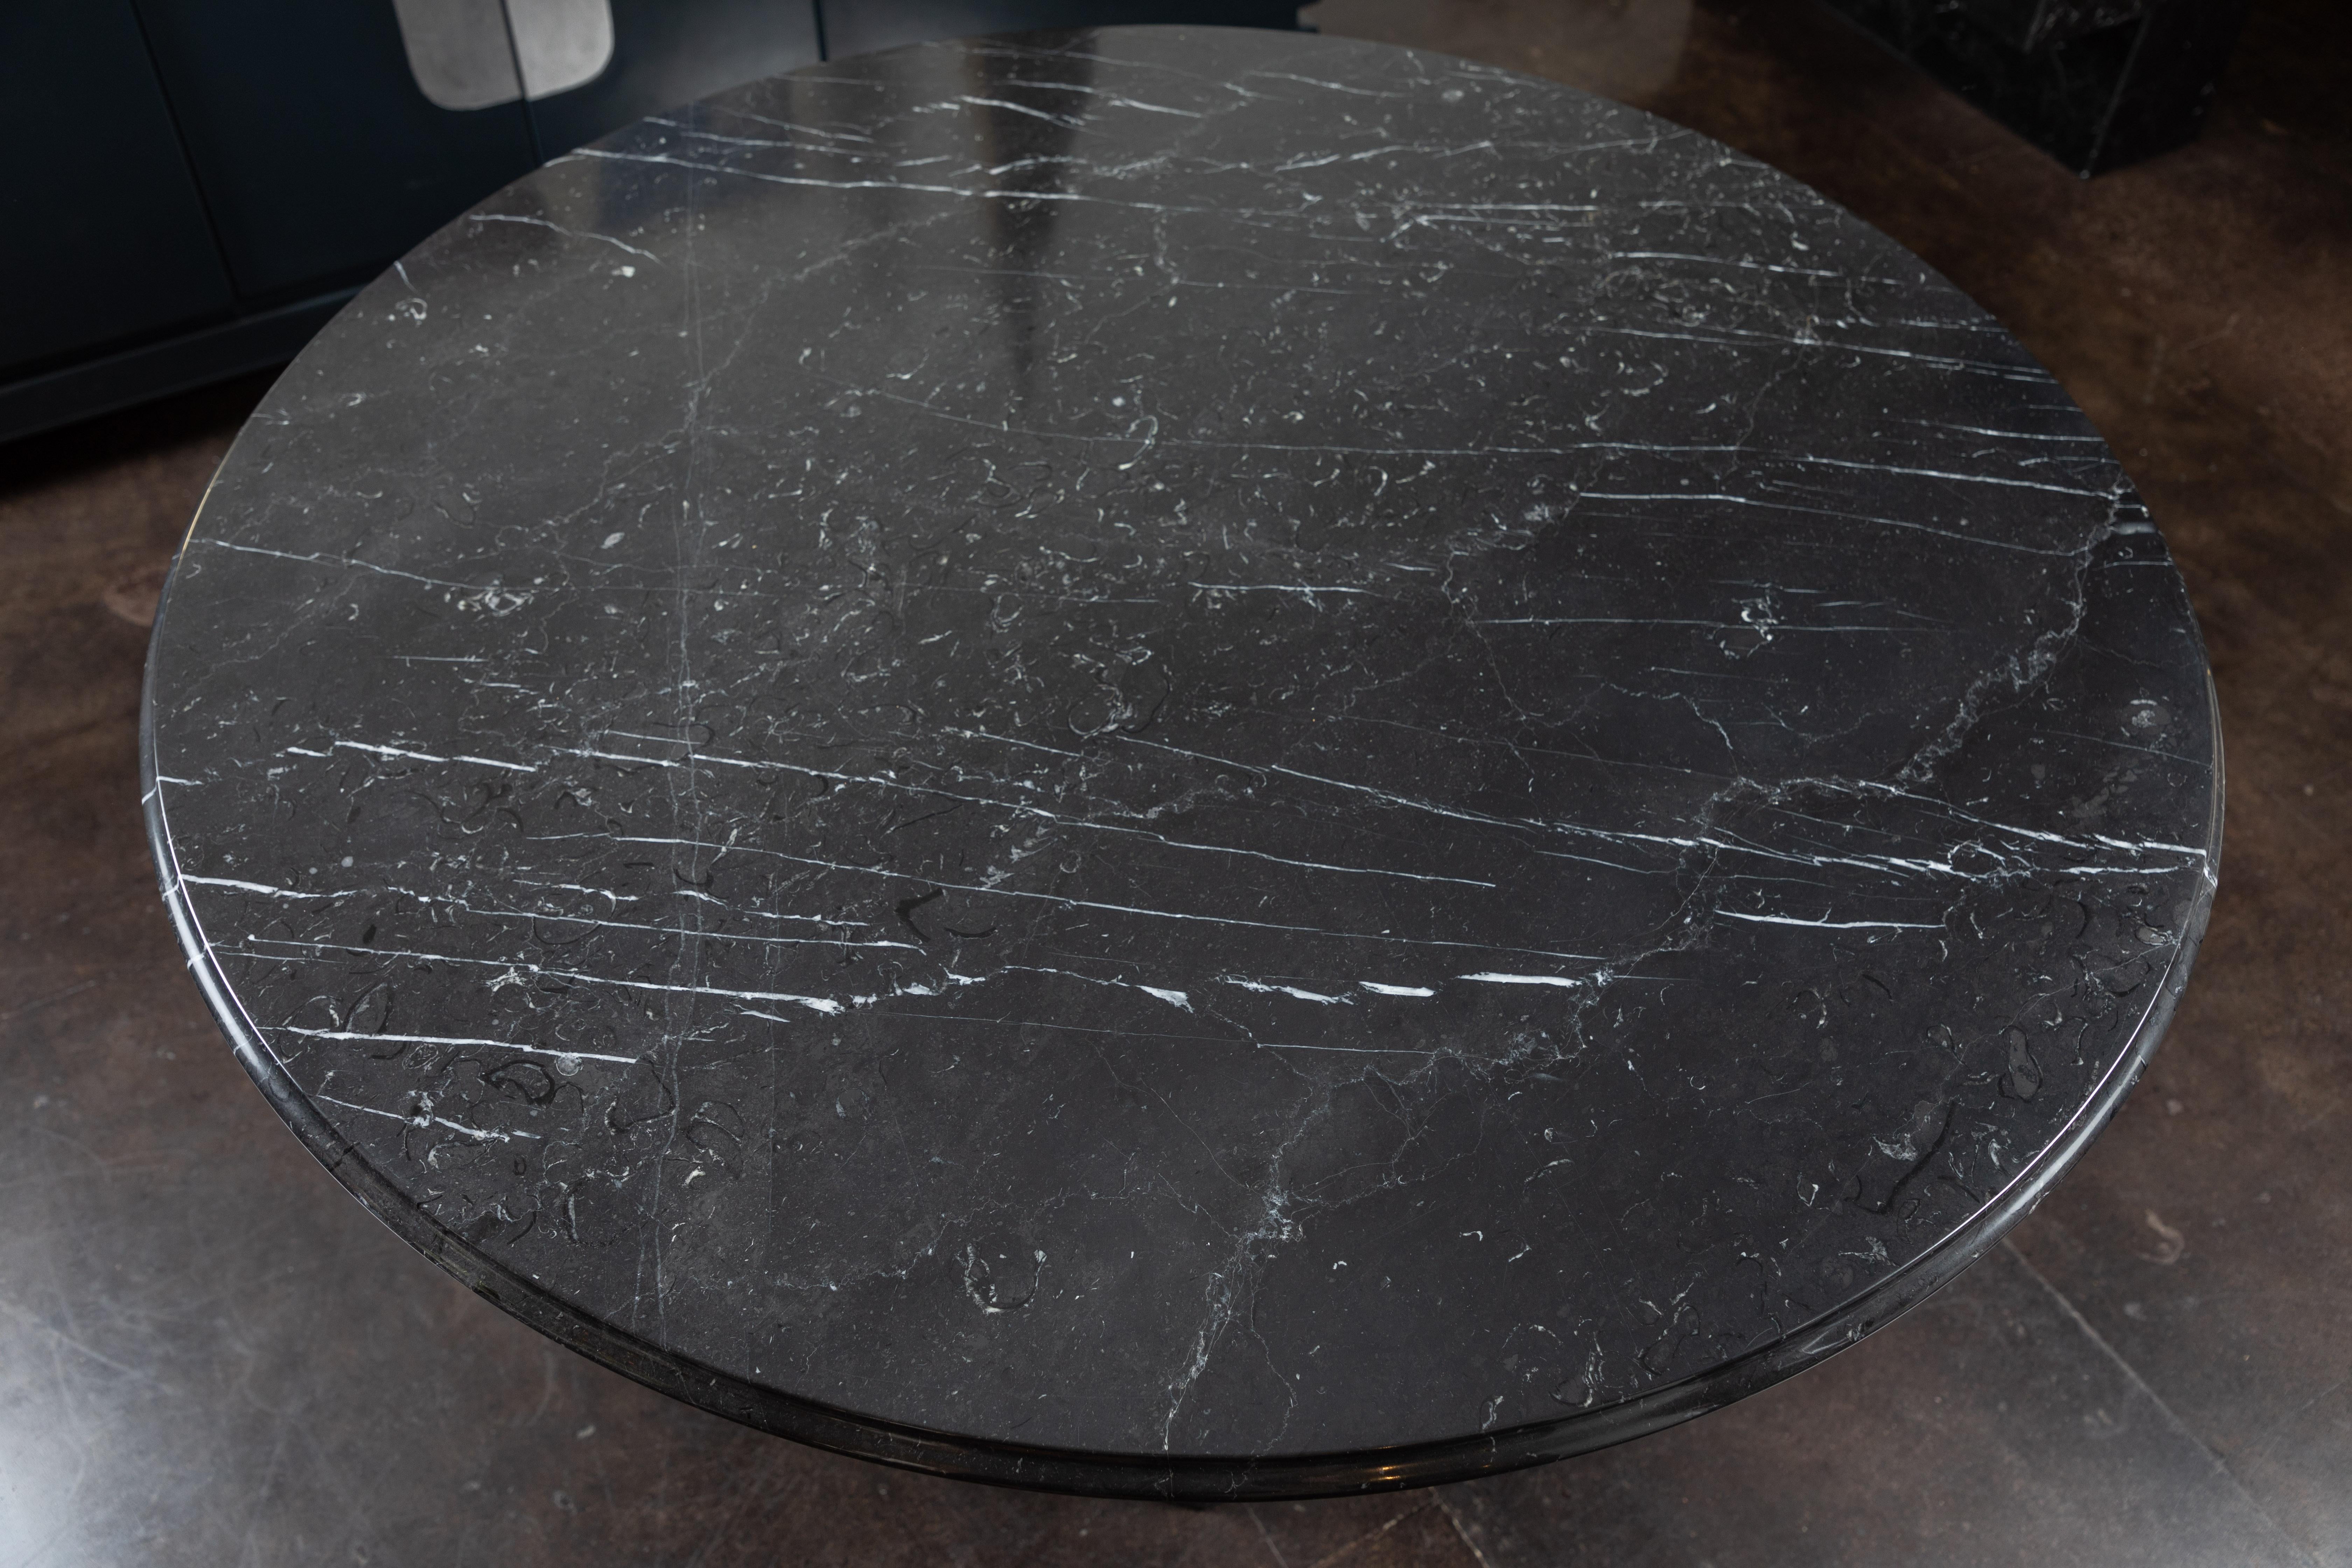 Lovely and versatile table in Nero Marquina marble, early 1990s. Can be used as a dining table or centre table. Excellent condition, no cracks or chips. The table has been professionally polished.